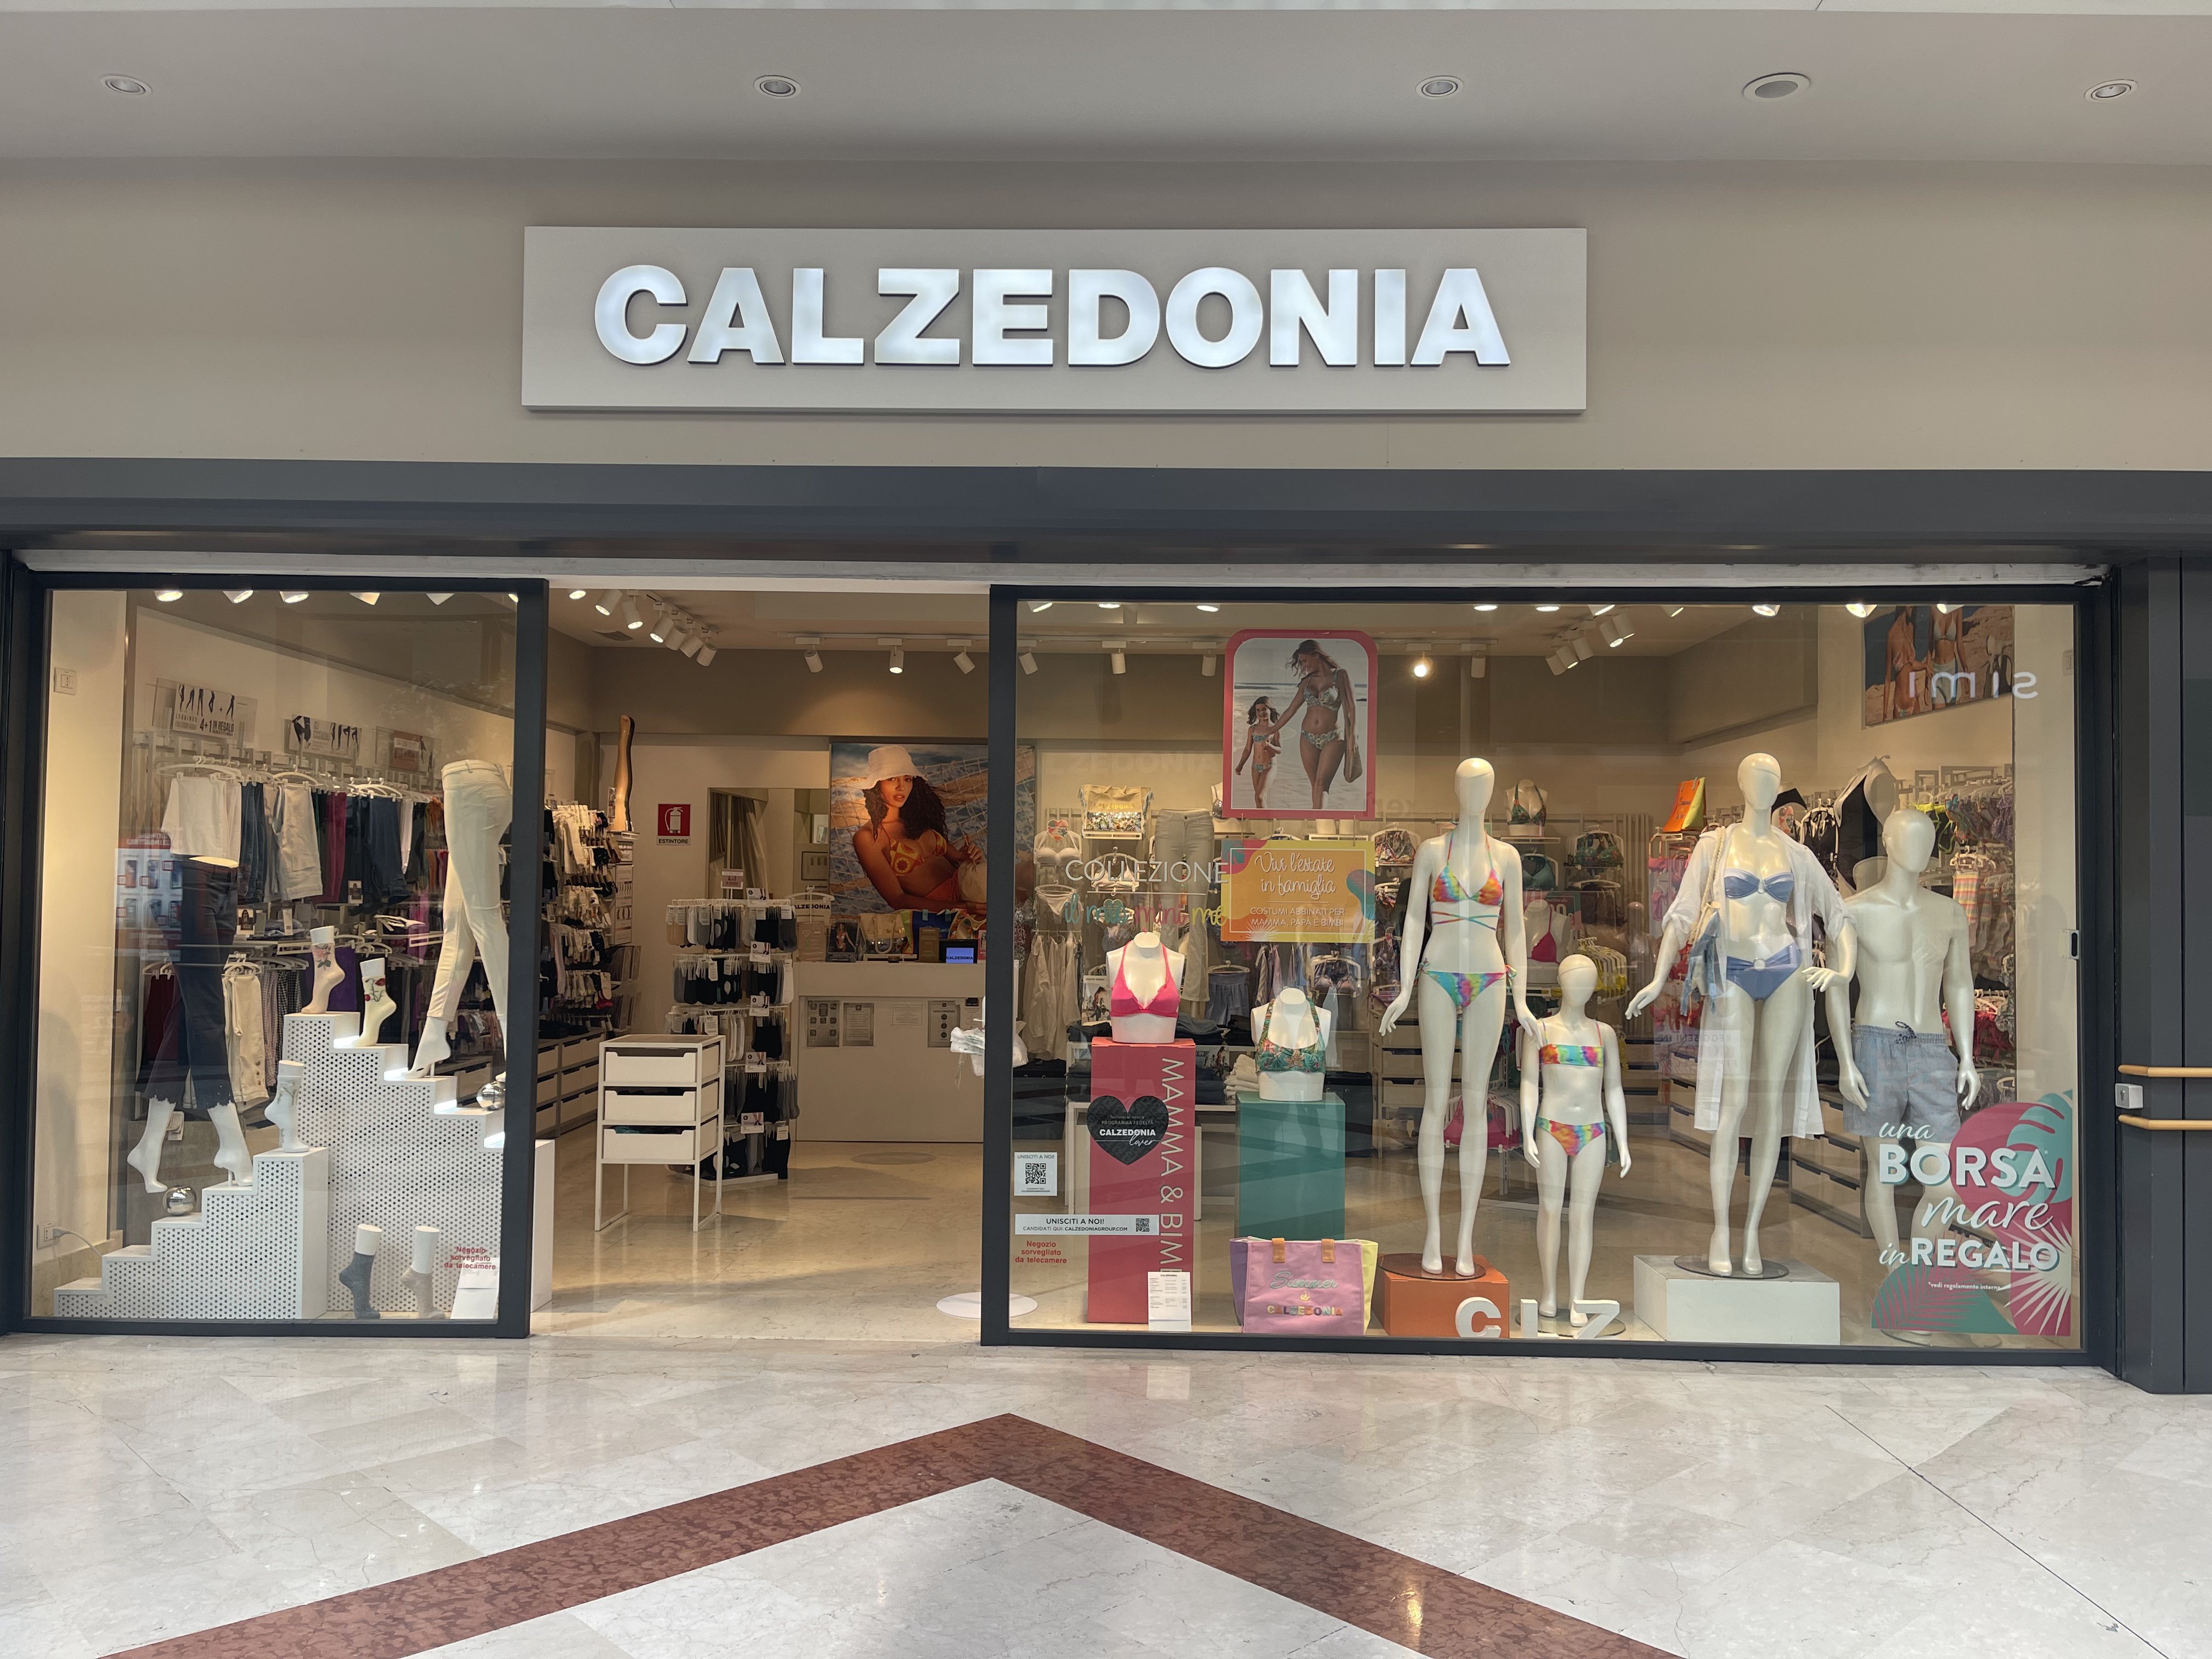 Calzedonia BEINASCO CCLE LE FORNACI